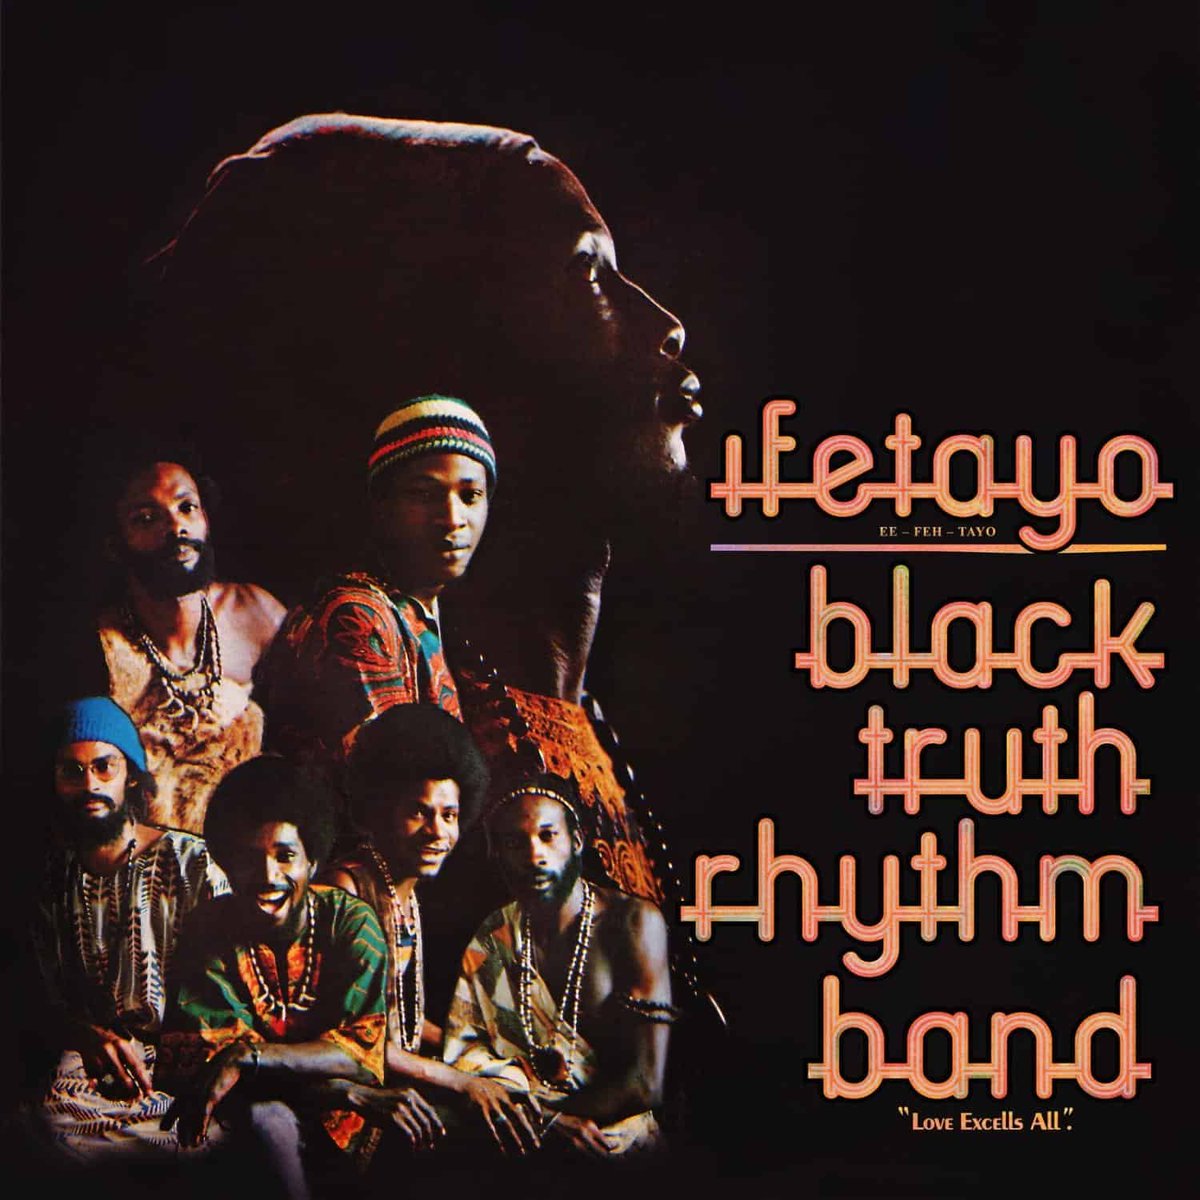 PRE-ORDER: 'Ifetayo' by Black Truth Rhythm Band This one from the Trinidadian funk group has become a collector's favourite for its blending of a range of styles including Afrobeat, jazz, calypso, and trad. Caribbean sounds. @Soundway normanrecords.com/records/130652…